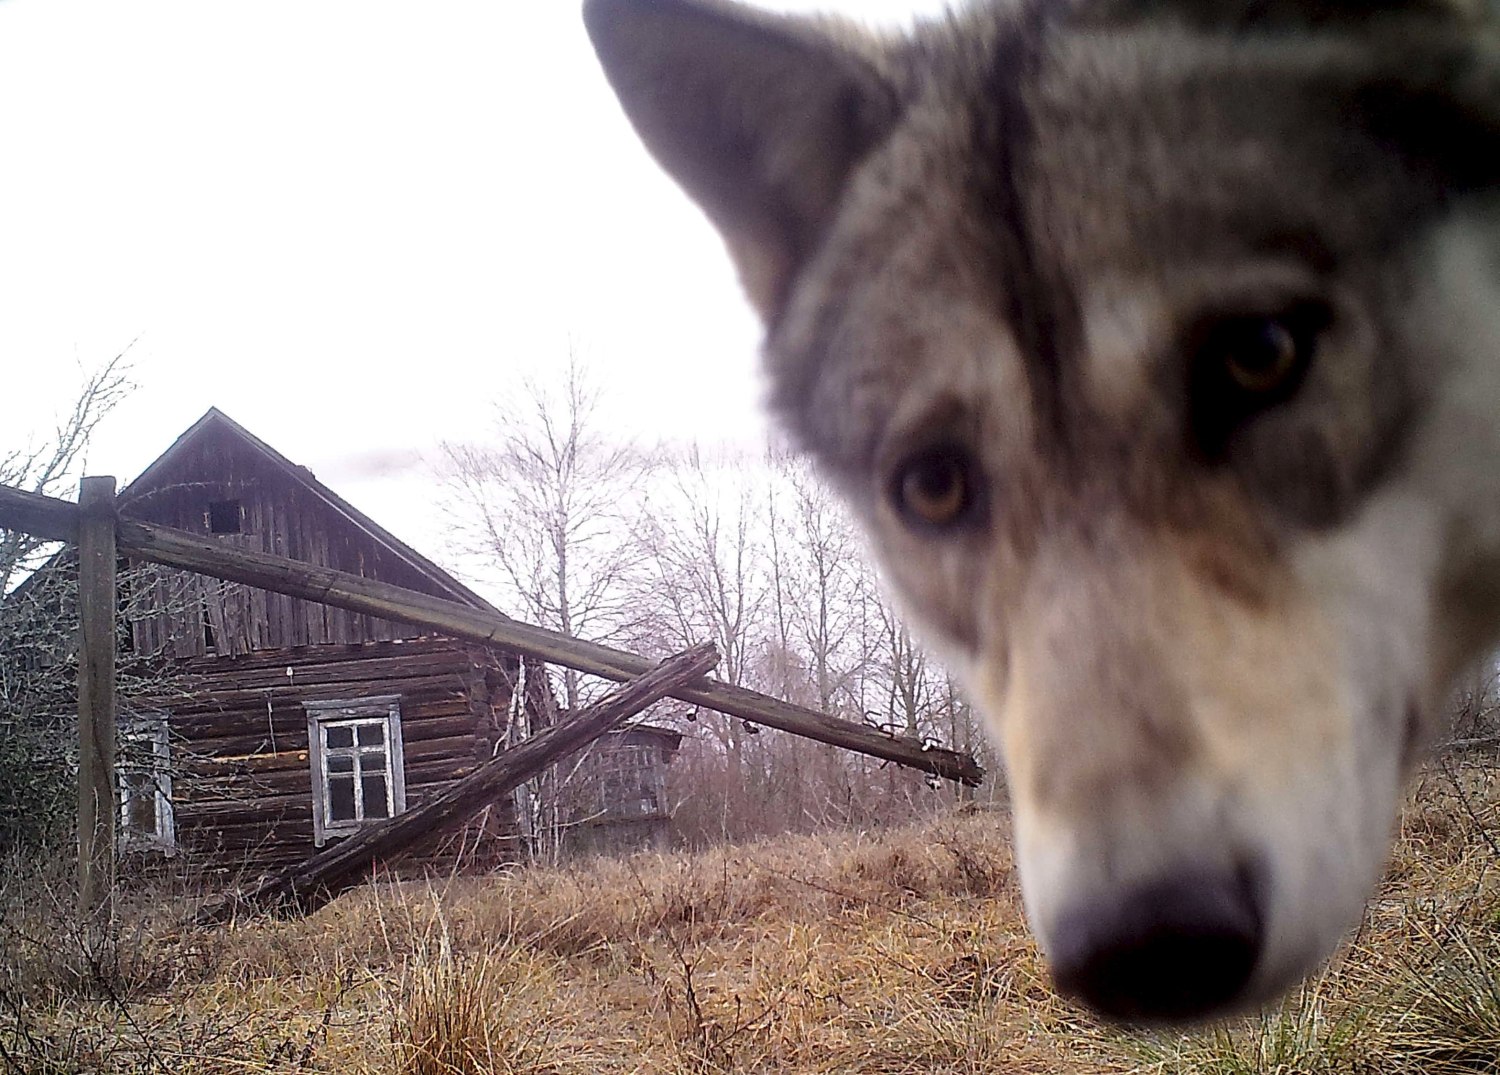 Chernobyl Anniversary: Disaster Exiled Humans, Made Way for Wildlife